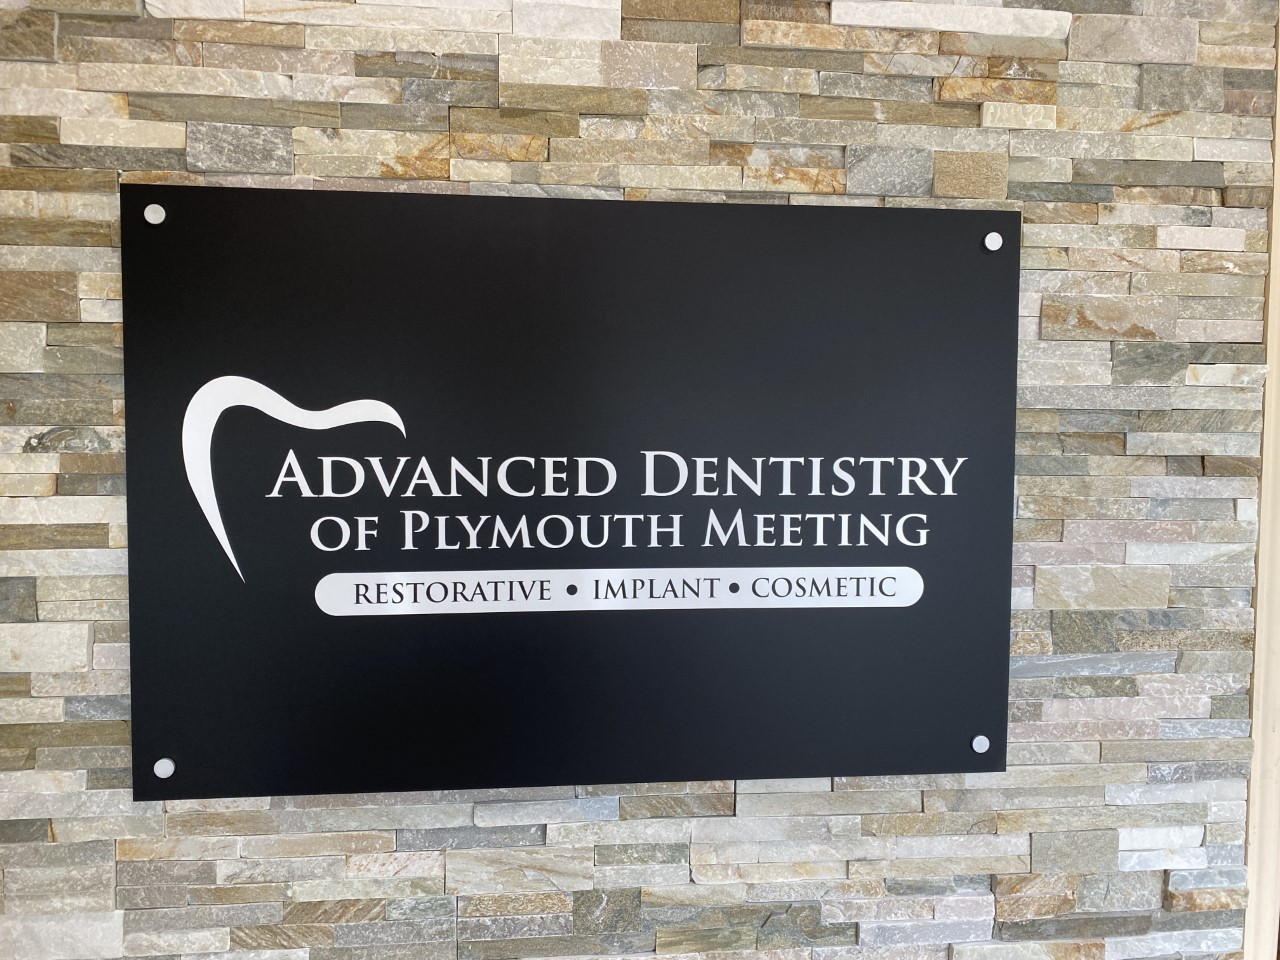 Advanced Dentistry of Plymouth Meeting